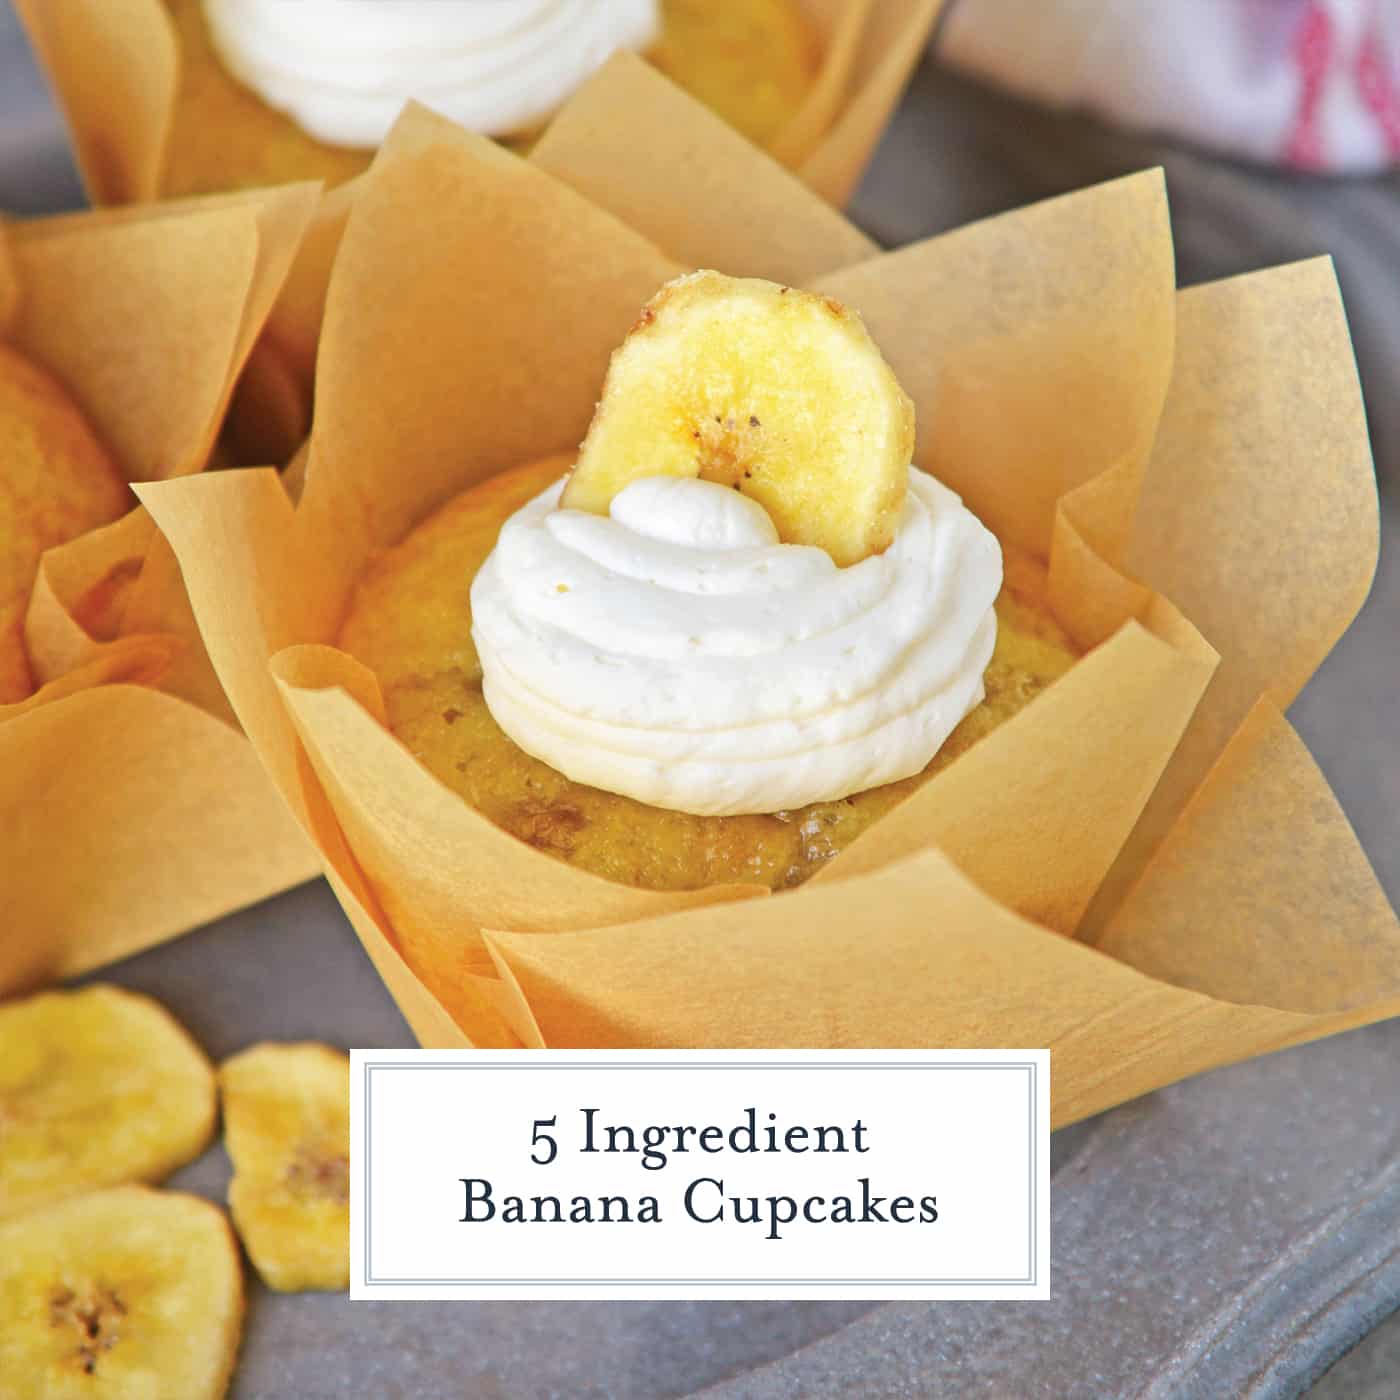 Five Ingredient Banana Cupcakes are a fabulous alternative to making banana bread with overly ripe bananas. This easy cupcake recipe will blow your mind! #easycupcakerecipes #bananacupcakes #bananarecipes www.savoryexperiments.com